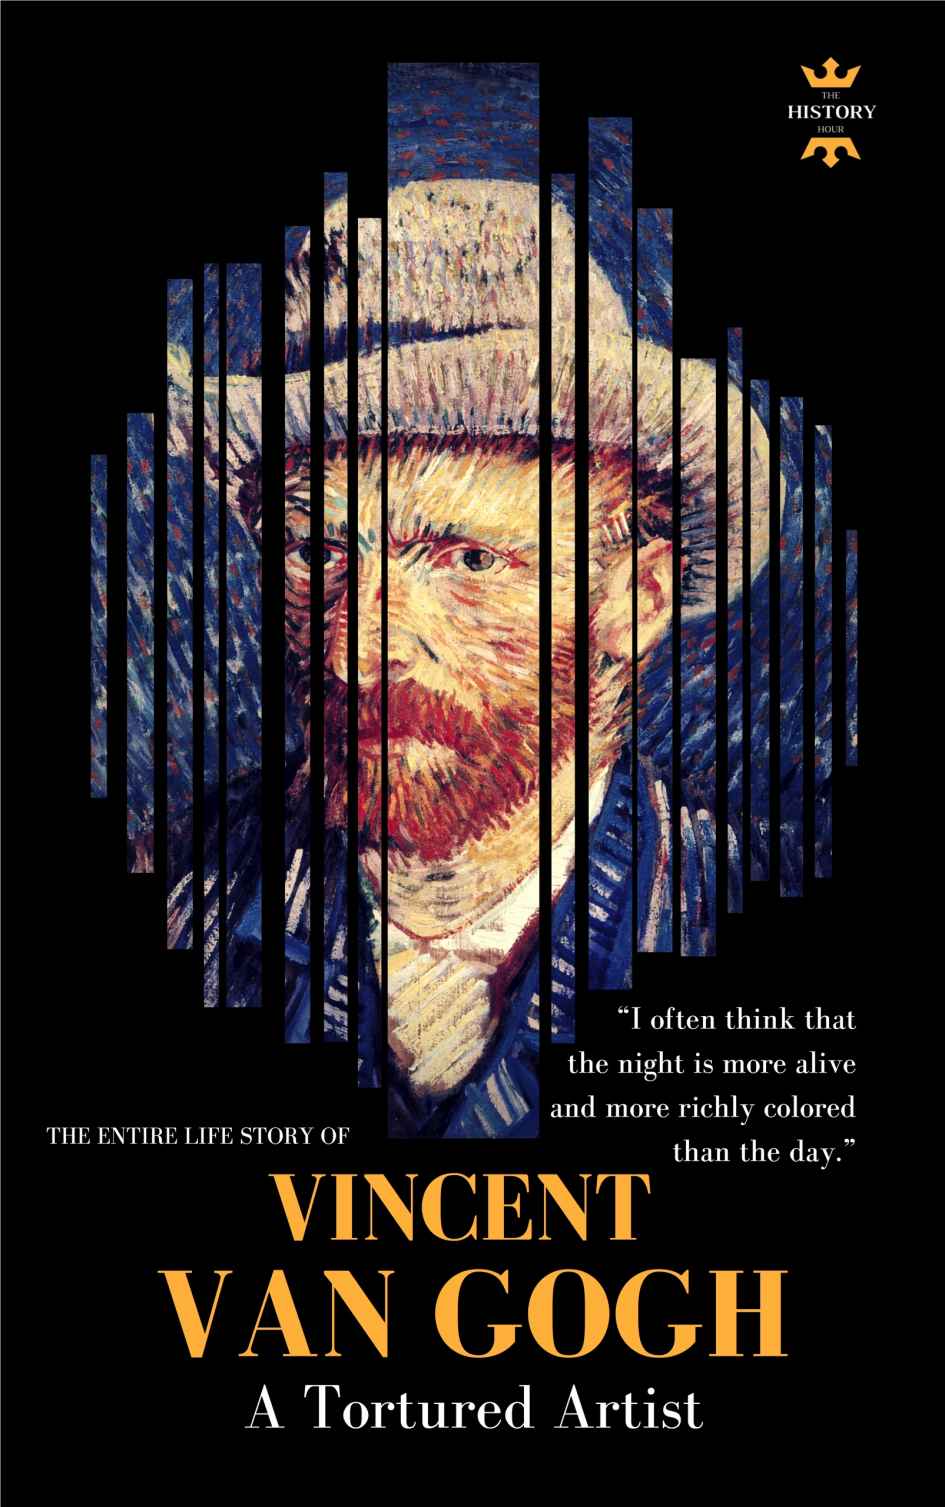 VINCENT VAN GOGH: A Tortured Artist. The Entire Life Story (GREAT BIOGRAPHIES Book 1)